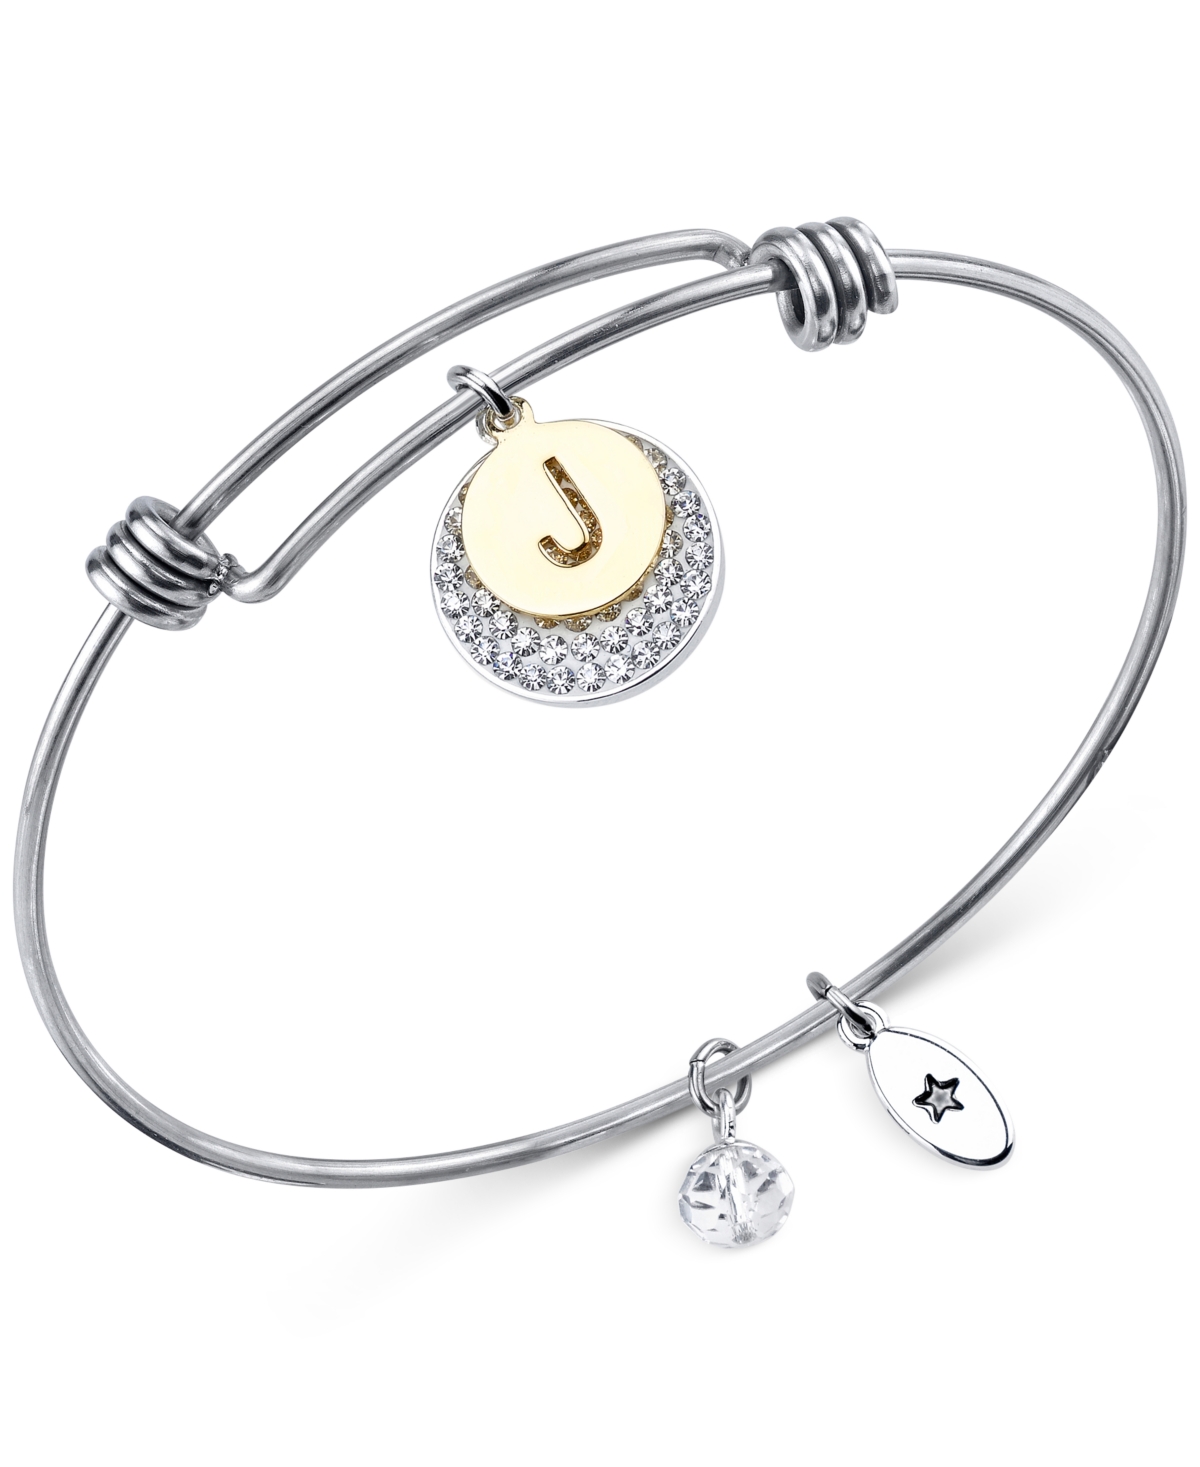 Pave and Initial Disc Bangle Bracelet in Stainless Steel and Silver Plated - J